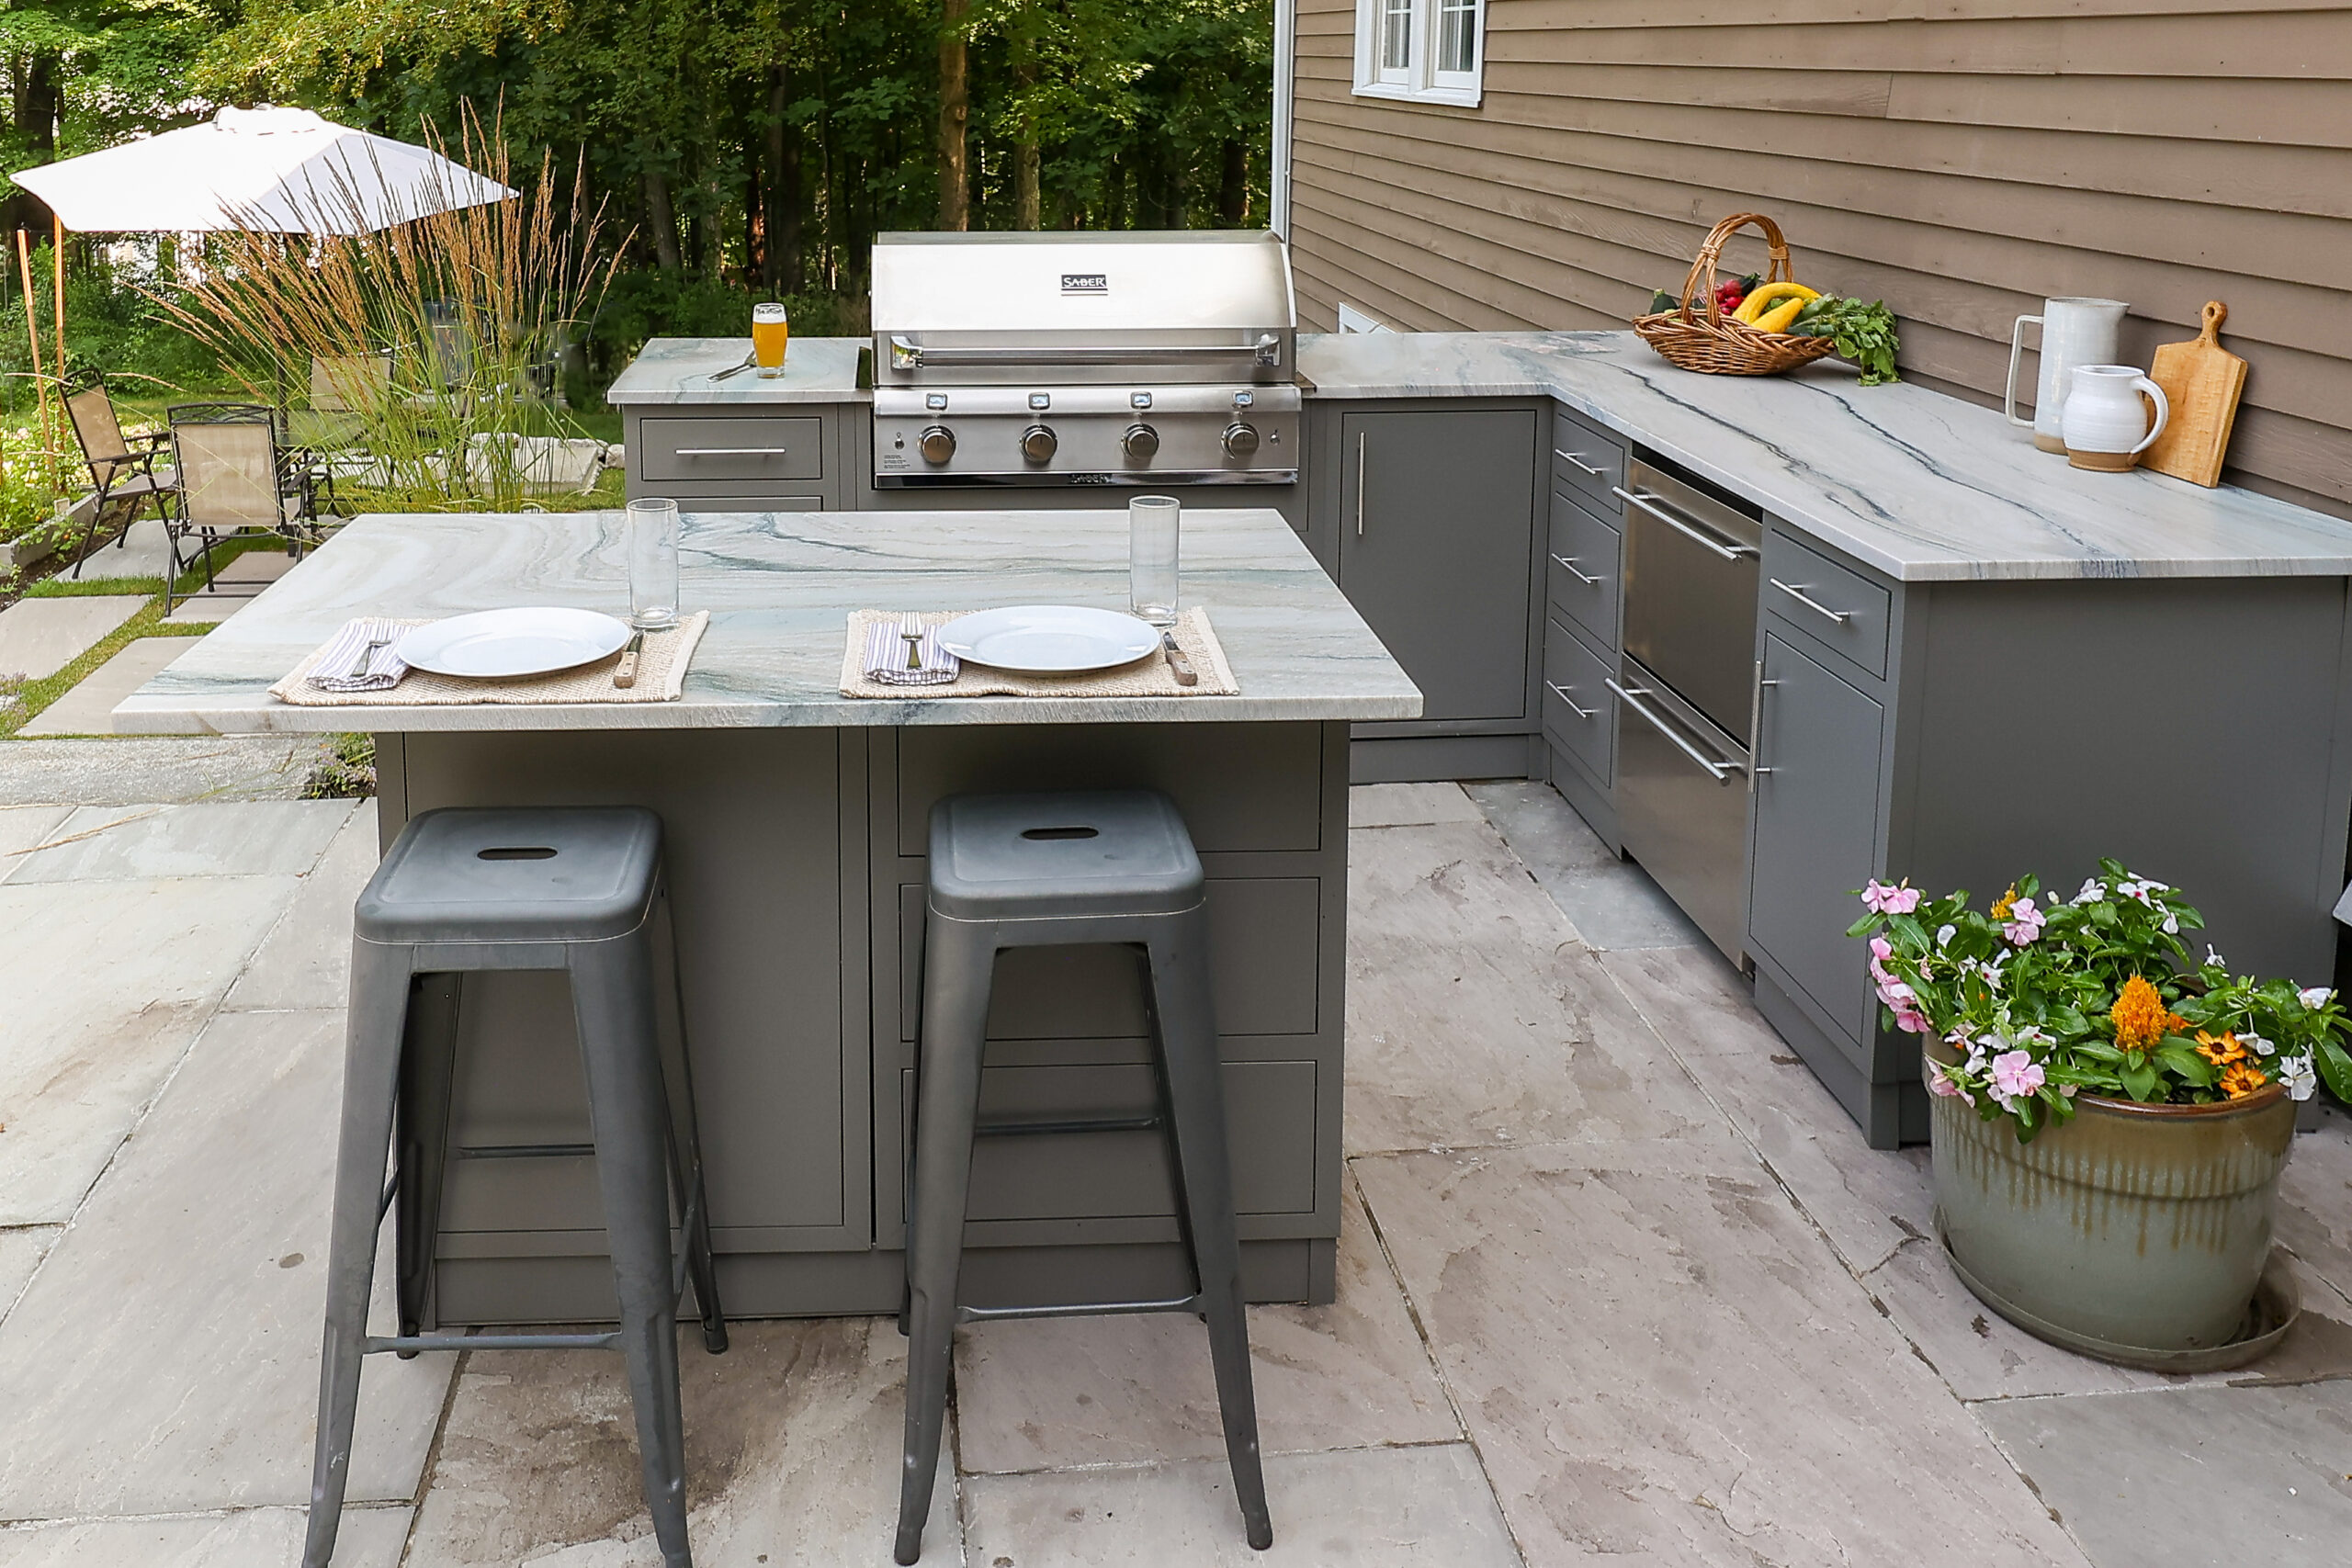 Ask When Planning An Outdoor Kitchen